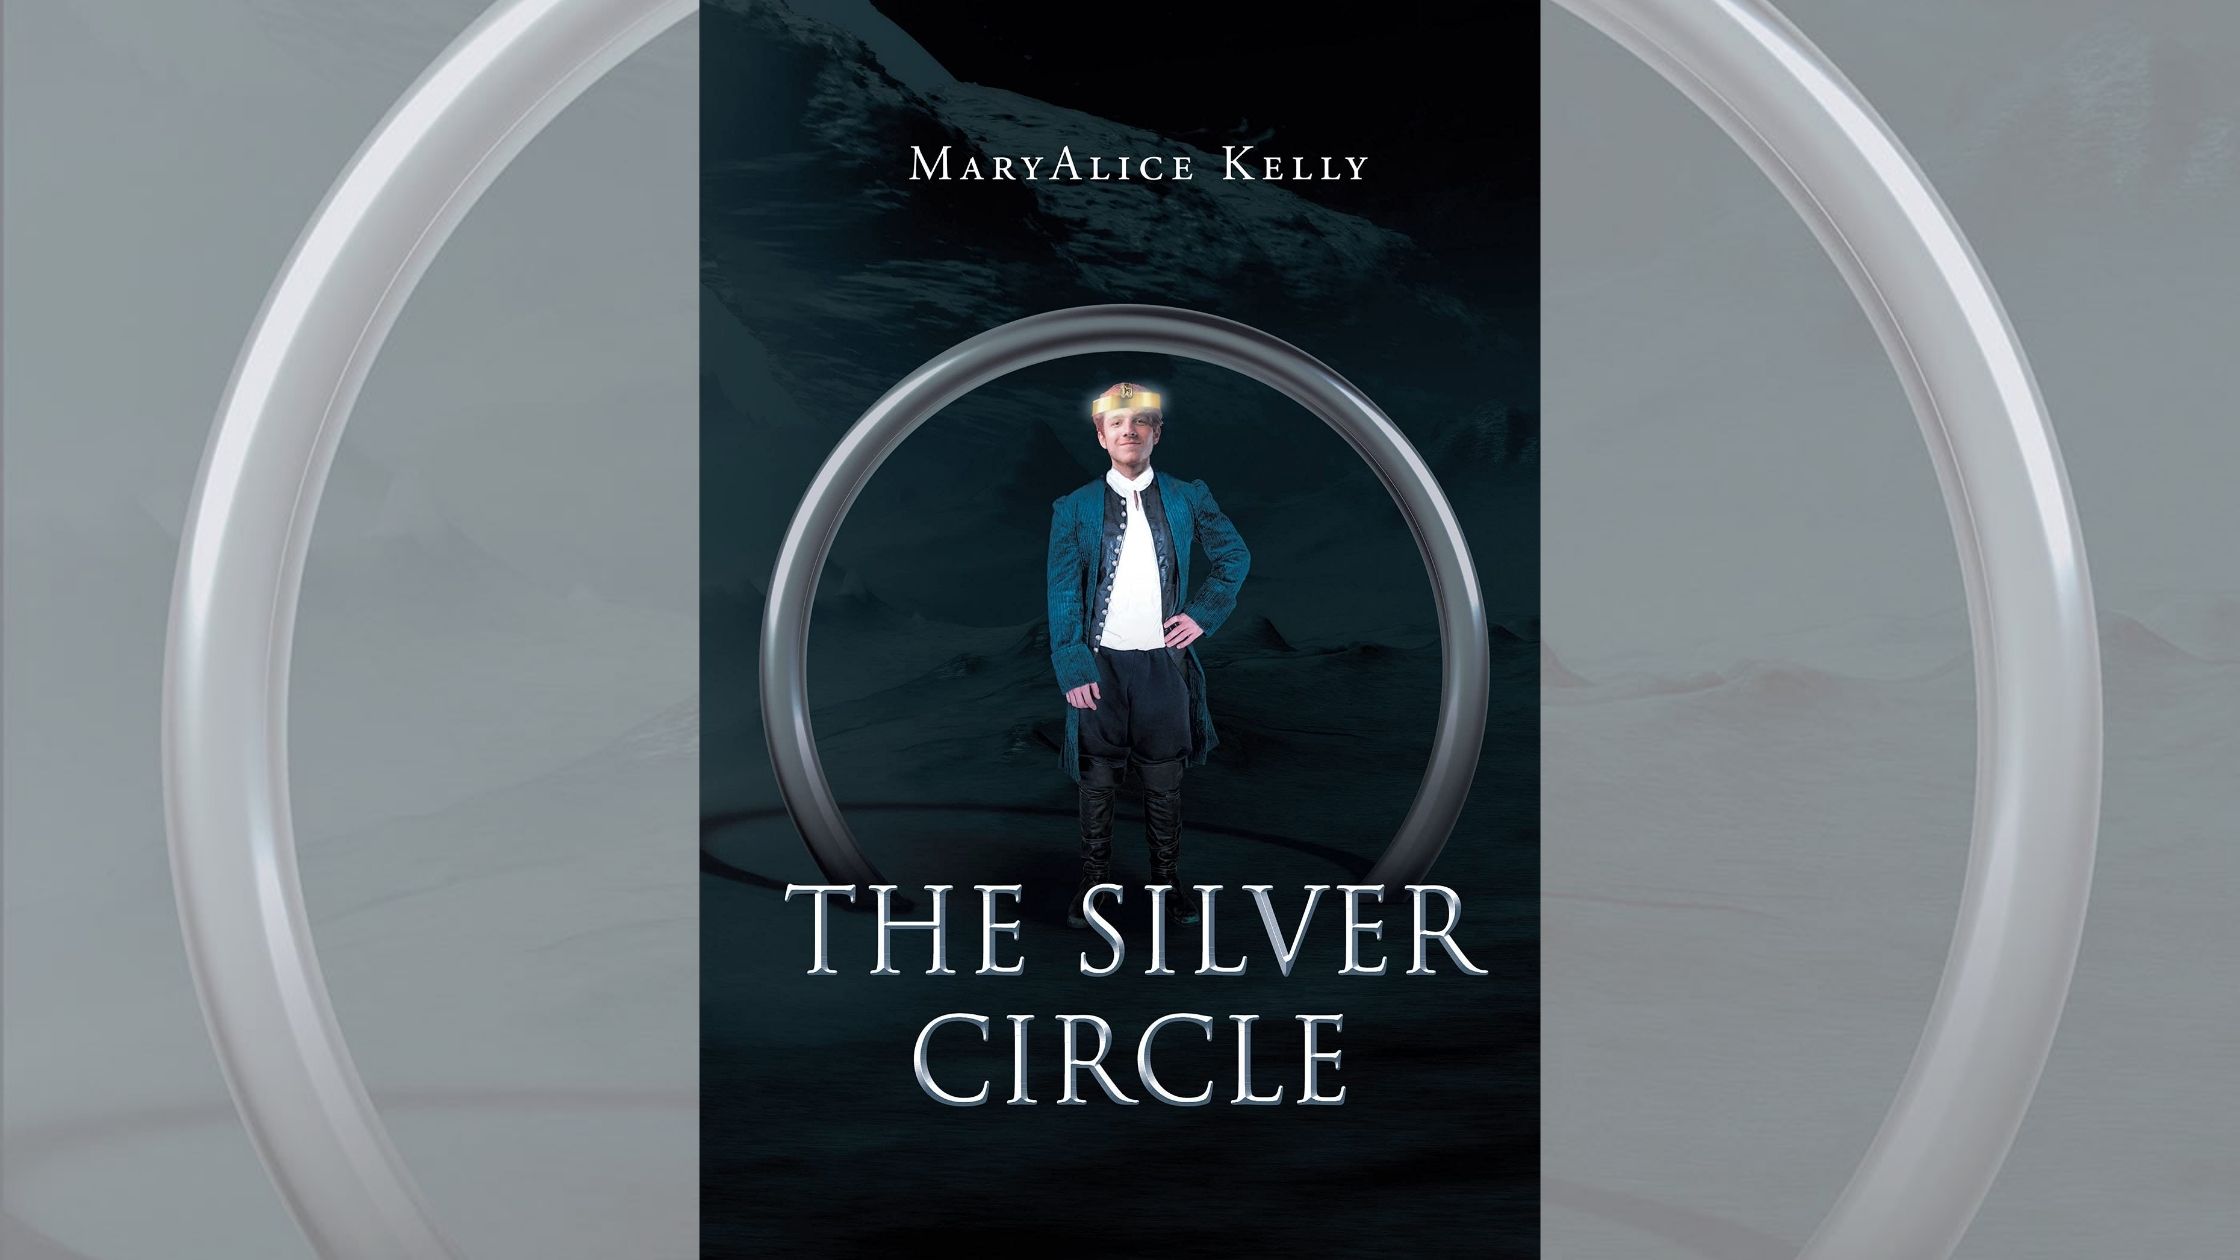 Author MaryAlice Kelly’s new book “The Silver Circle” is a compelling tale of magic, mystery, and friendship in the tiny kingdom of Lamara